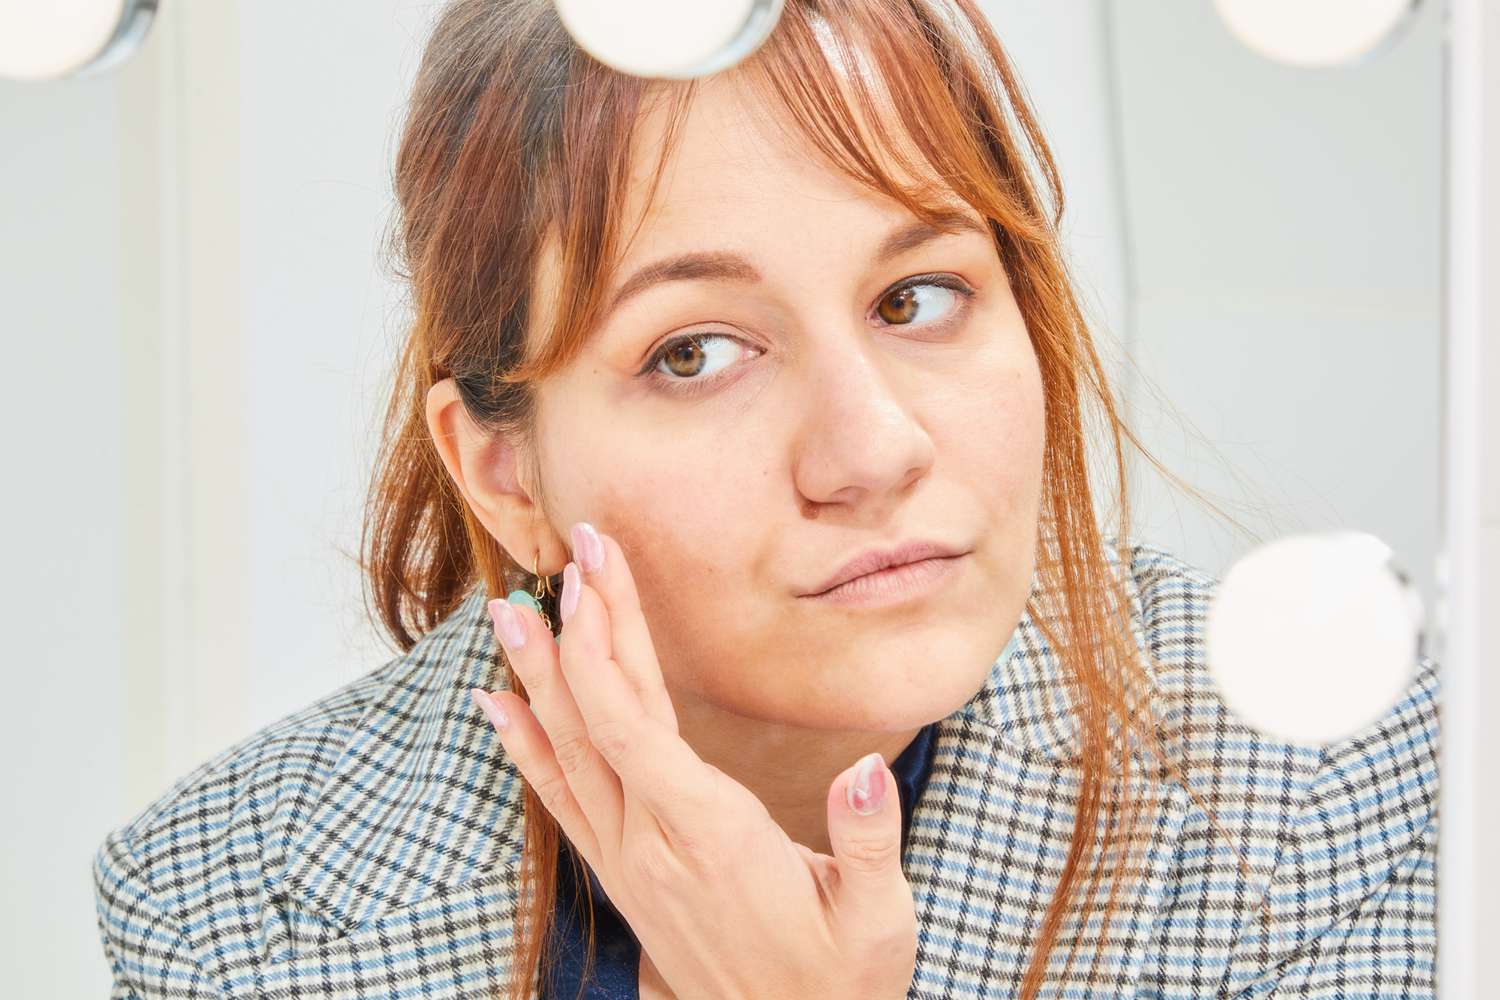 Person applying skin care product to their cheek